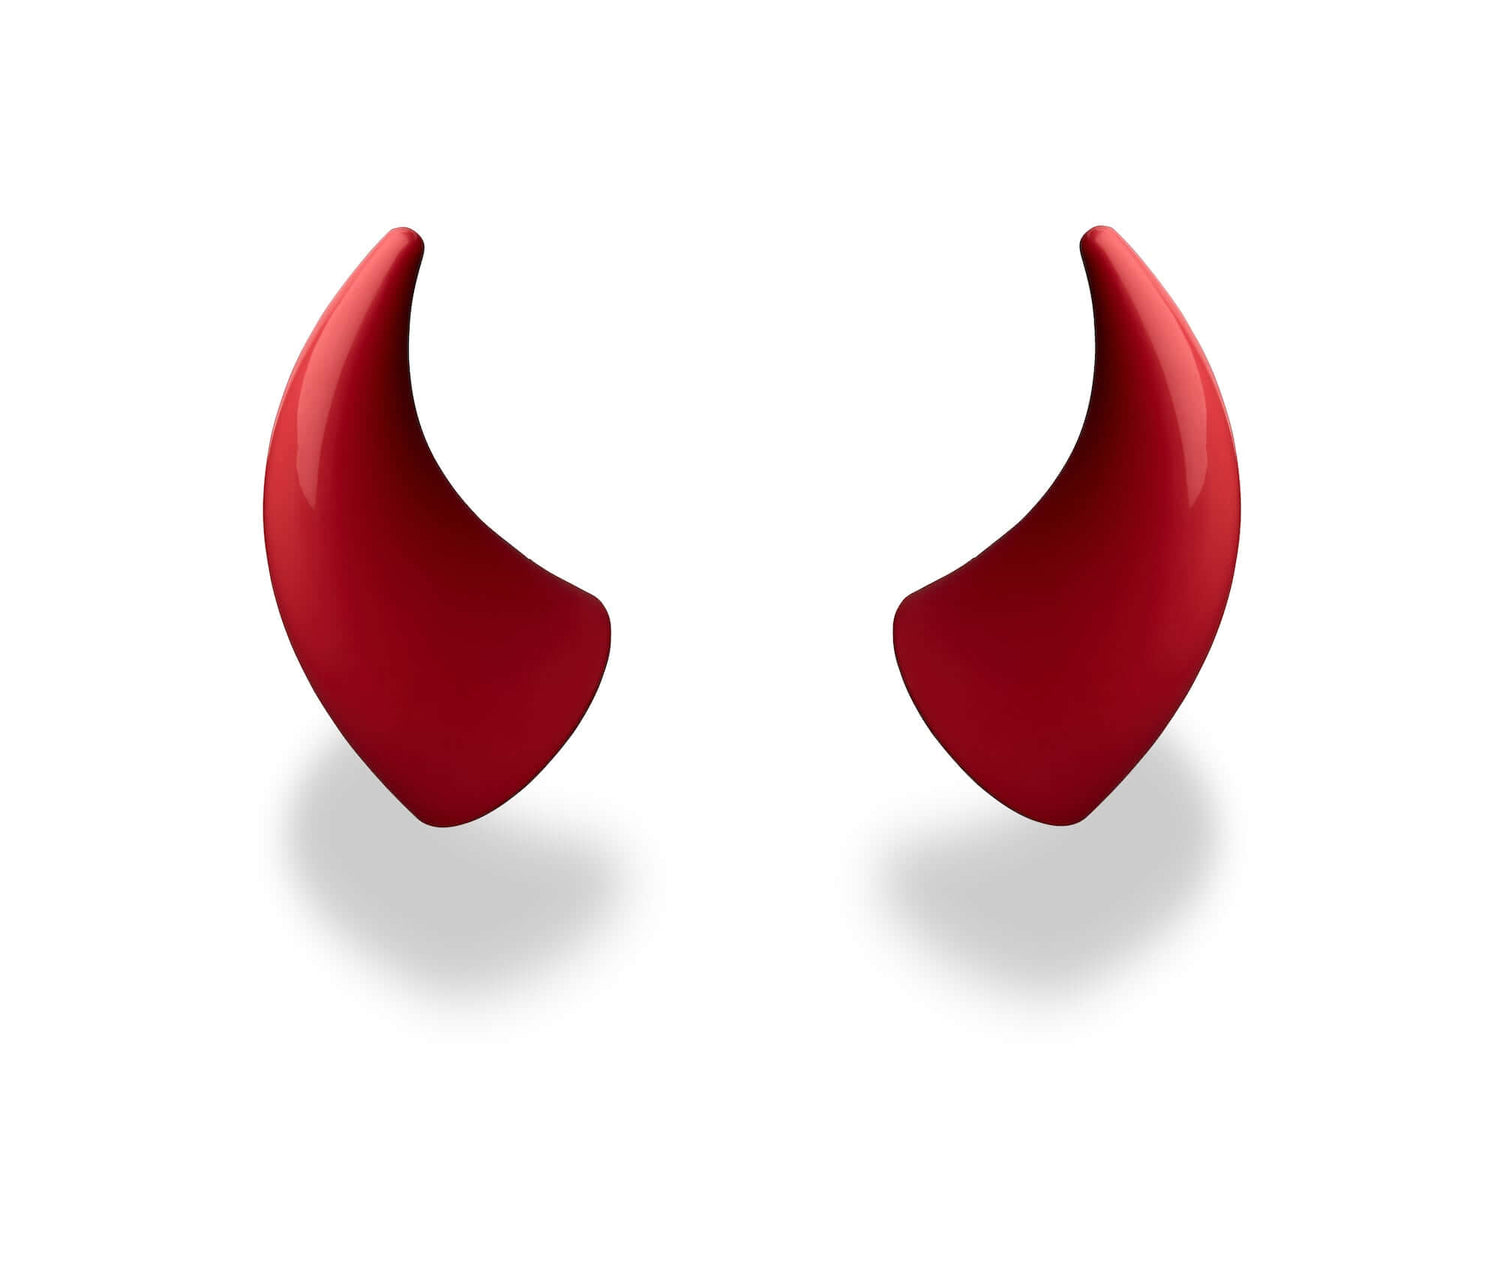 Large red devil horns to mount on a helmet as an accessory